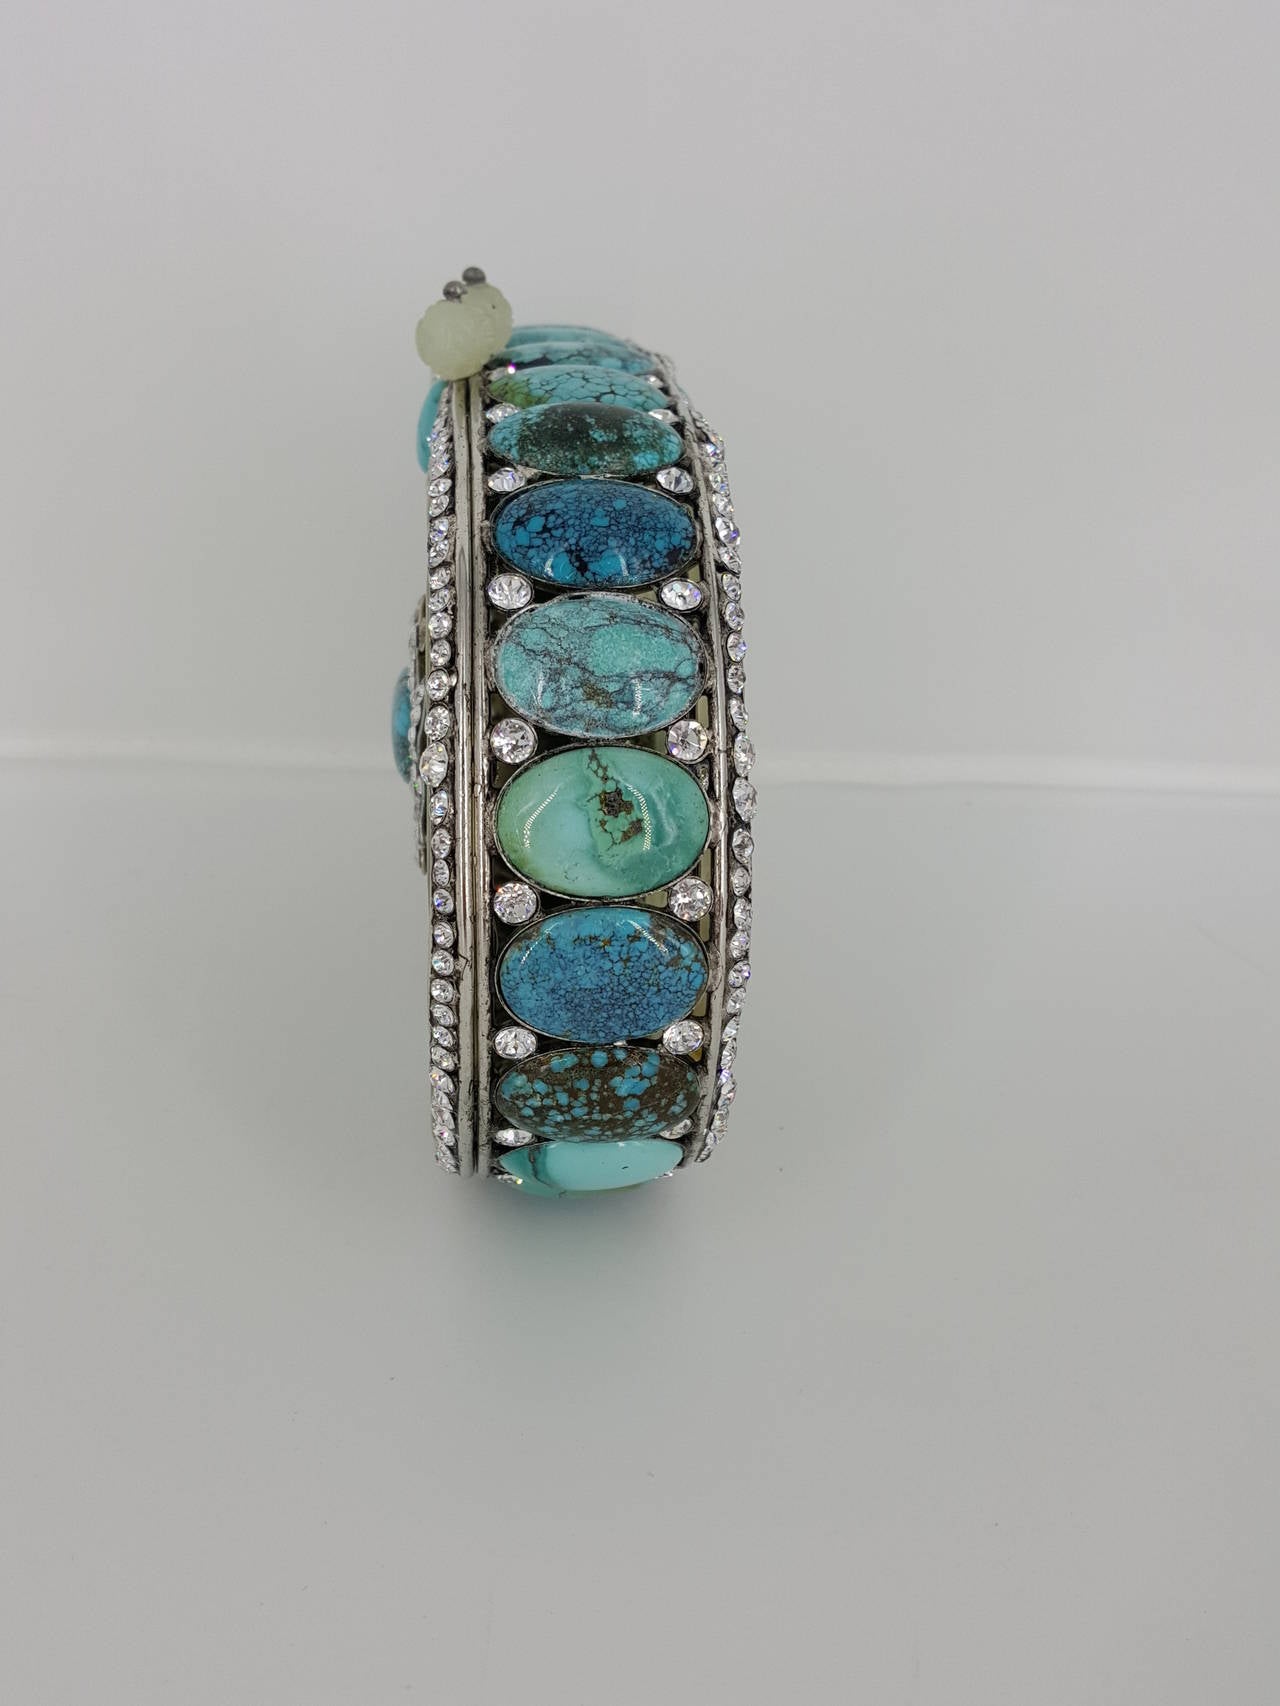 Offered for sale is this rare minaudiere by IRADJ MOINI.  This gorgeous piece has large carved jade on the front and back with a large cabochon turquoise stone in the center accented with Swarovski crystal and silver trim.  The sides and the bottom